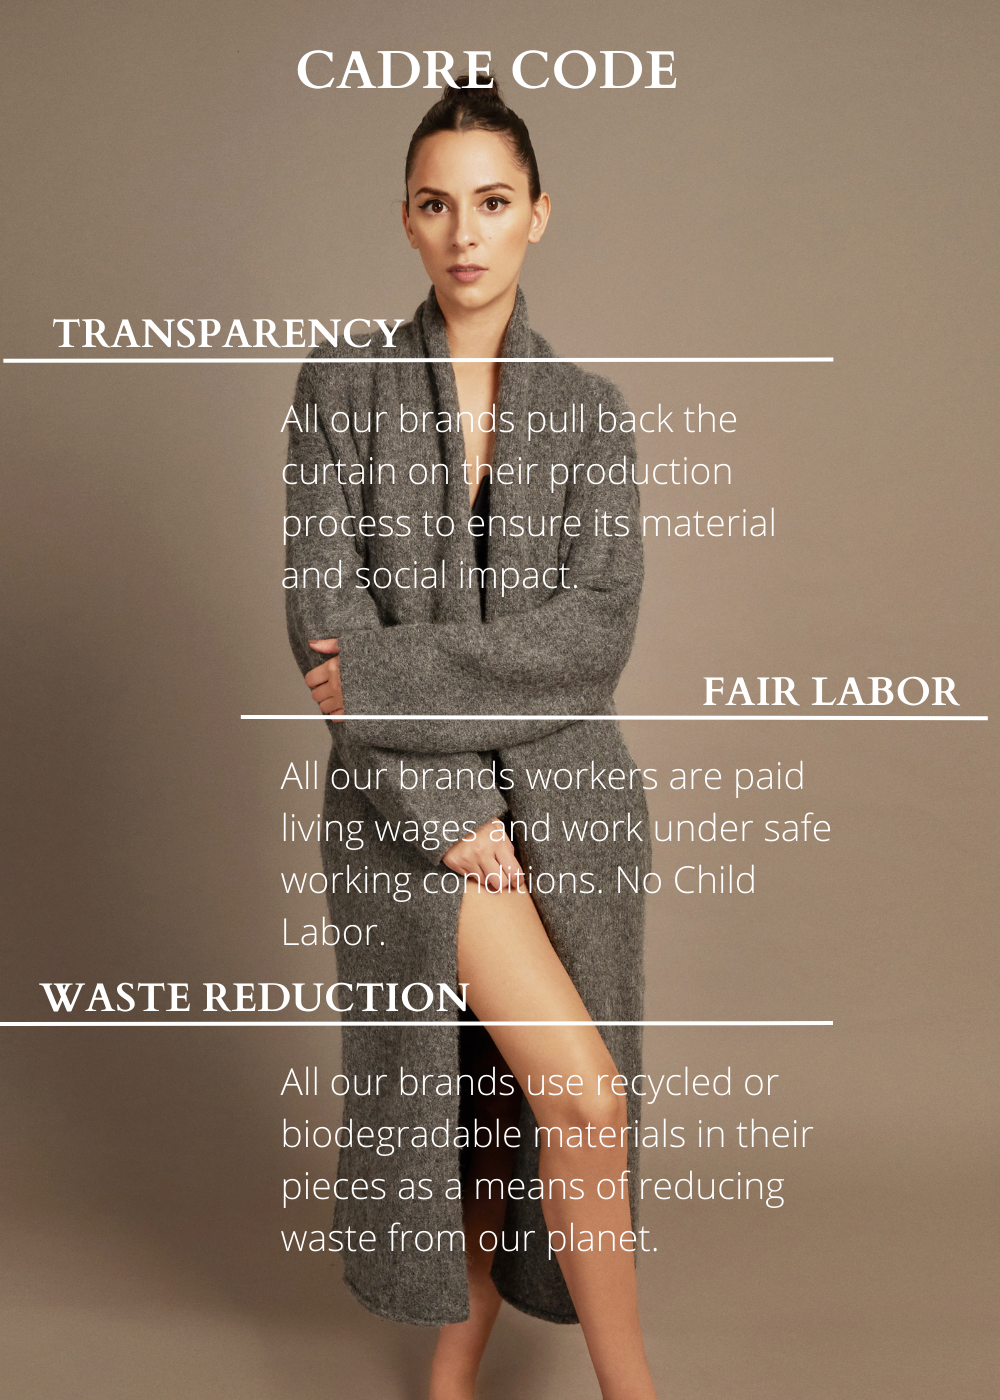 Cadre Style sustainability standards transparency, fair labor and waste reduct